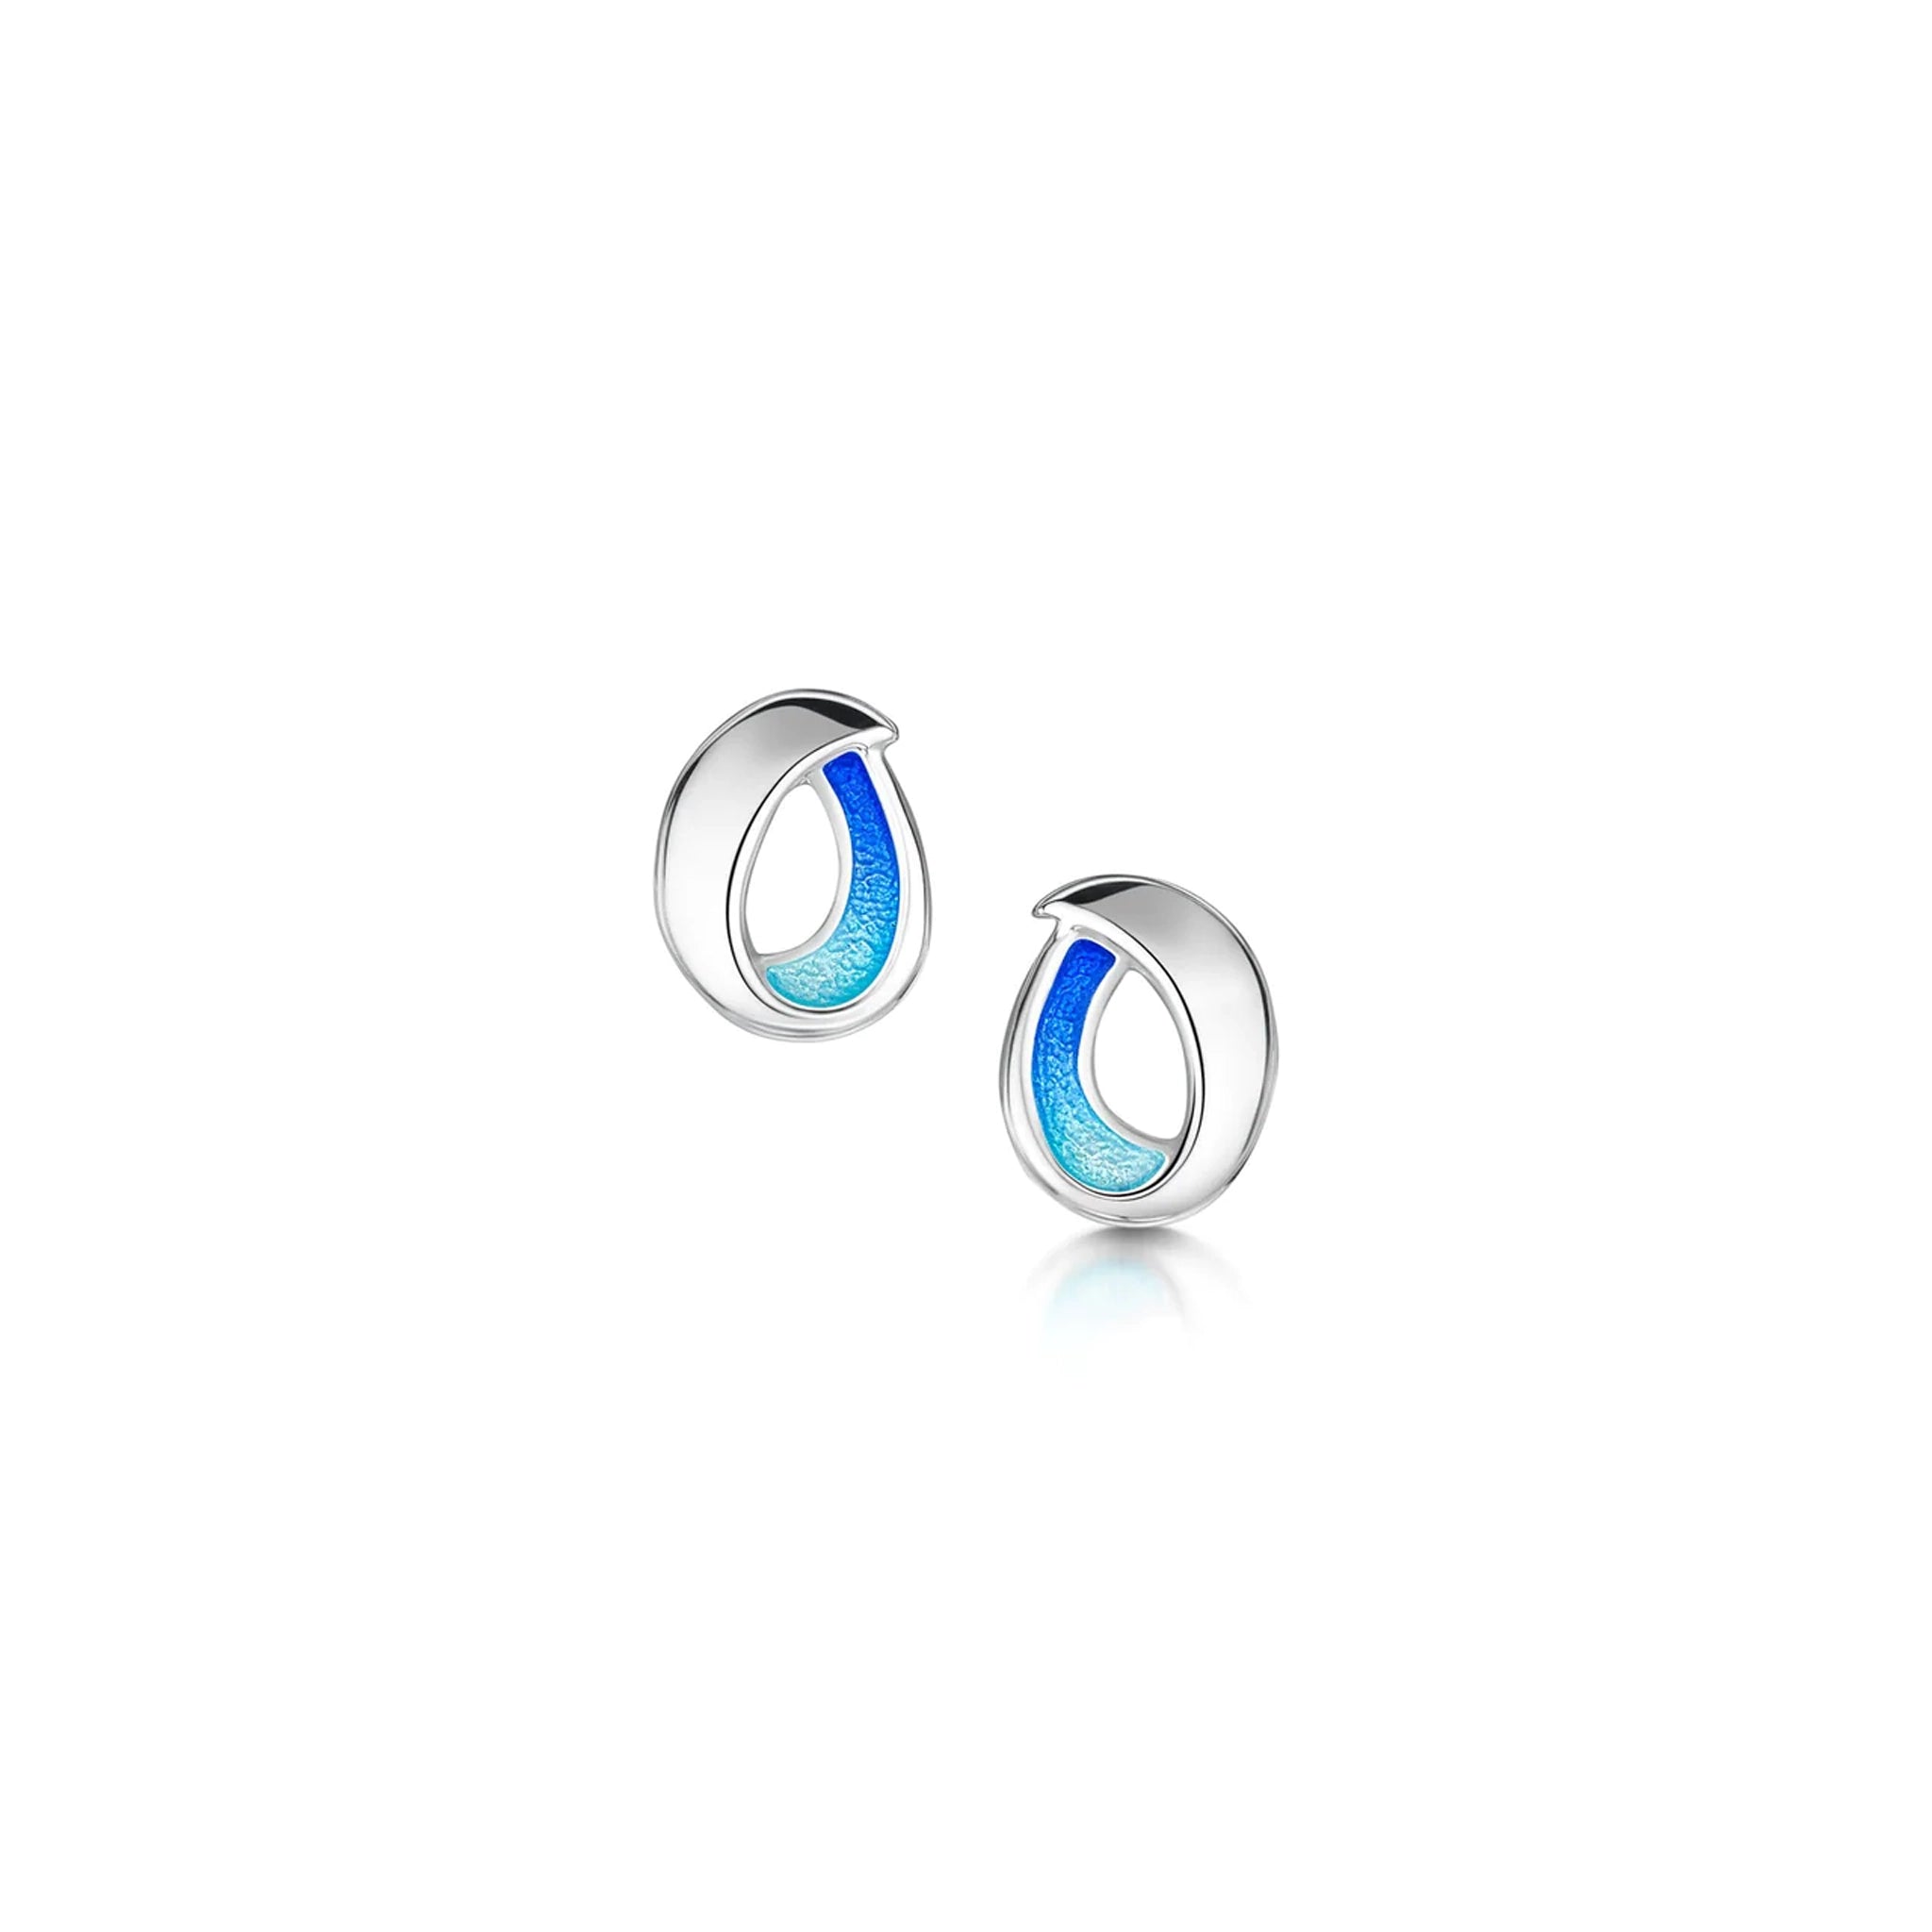 Silver stud earrings with bright blue enamel in a simple abstract ocean wave shape